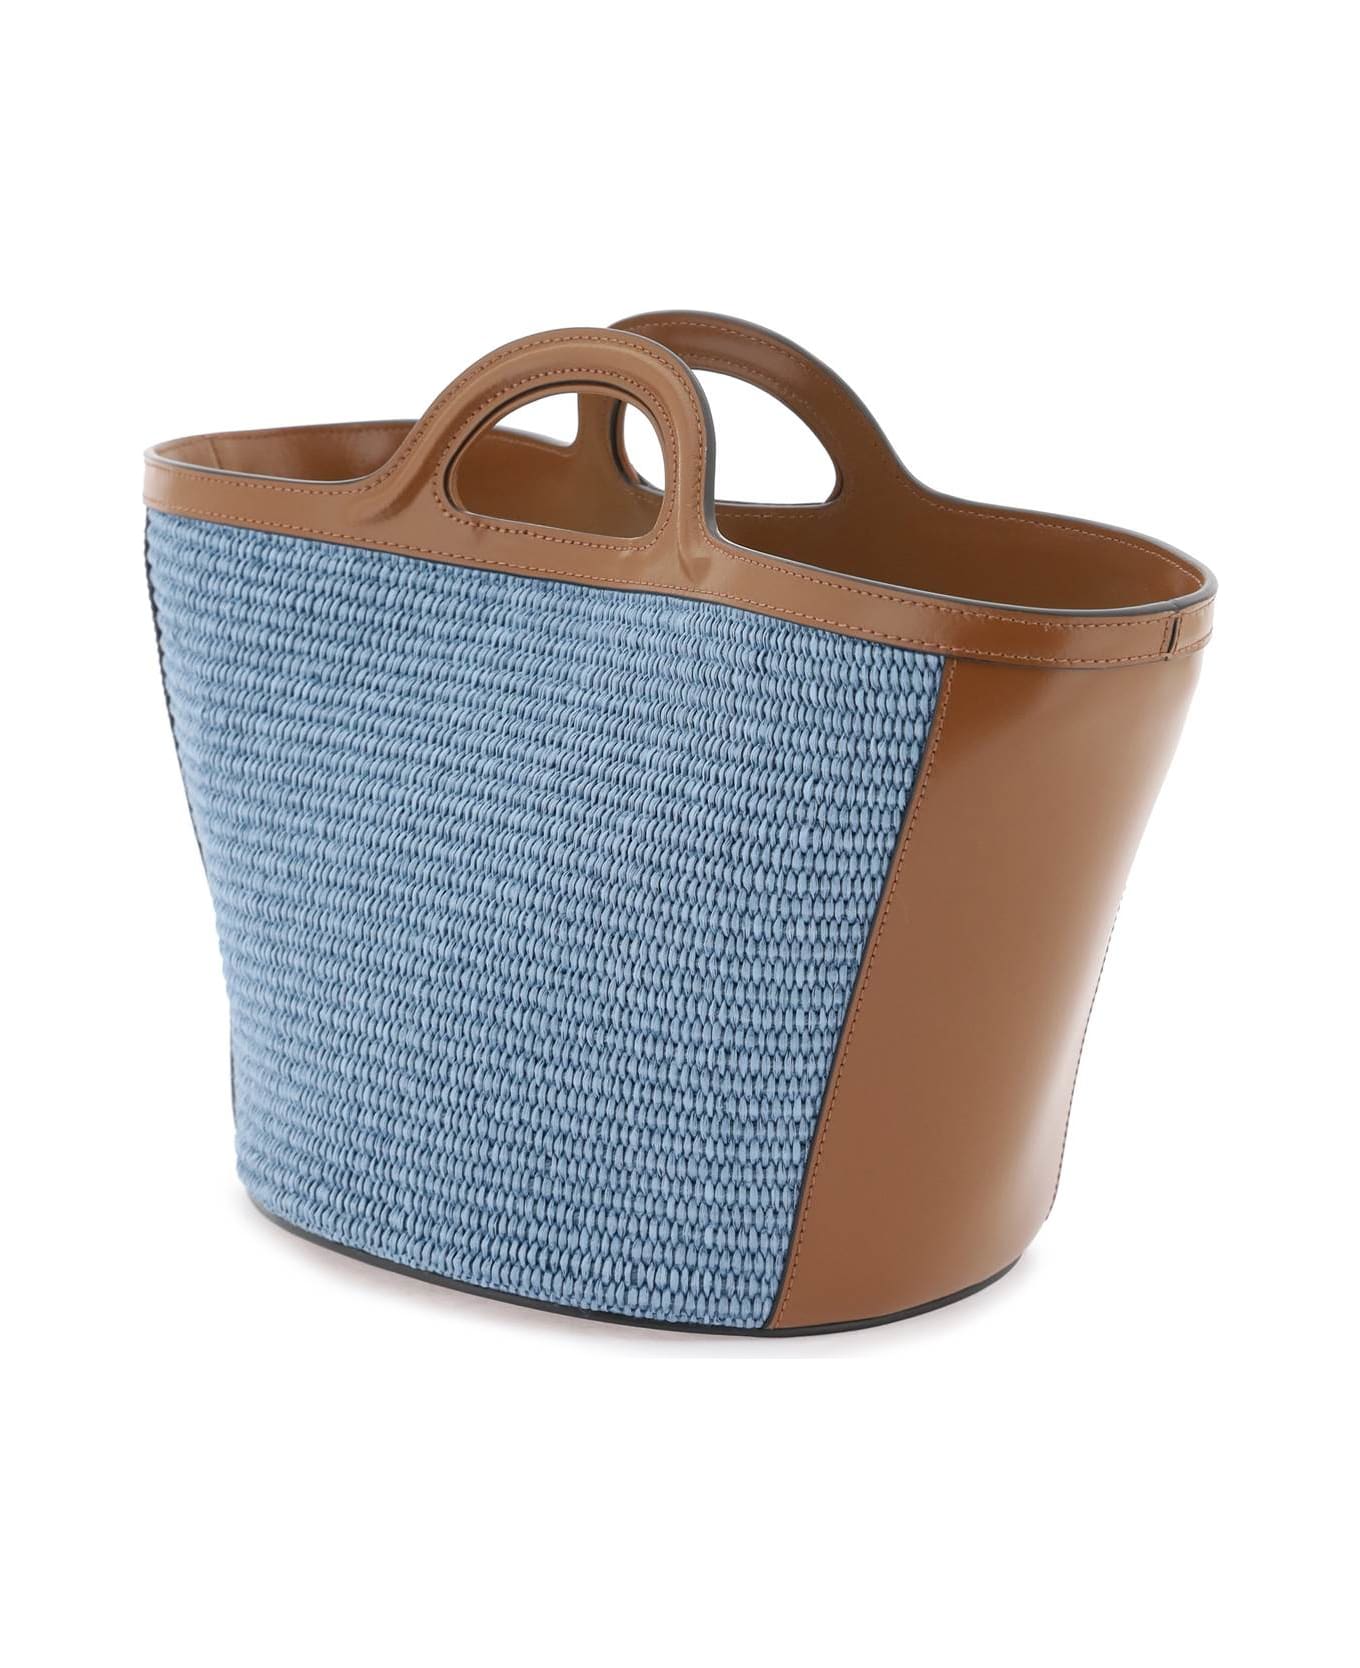 Marni Small Tropicalia Summer Bag In Brown Leather And Light Blue Raffia - ZO751 トートバッグ